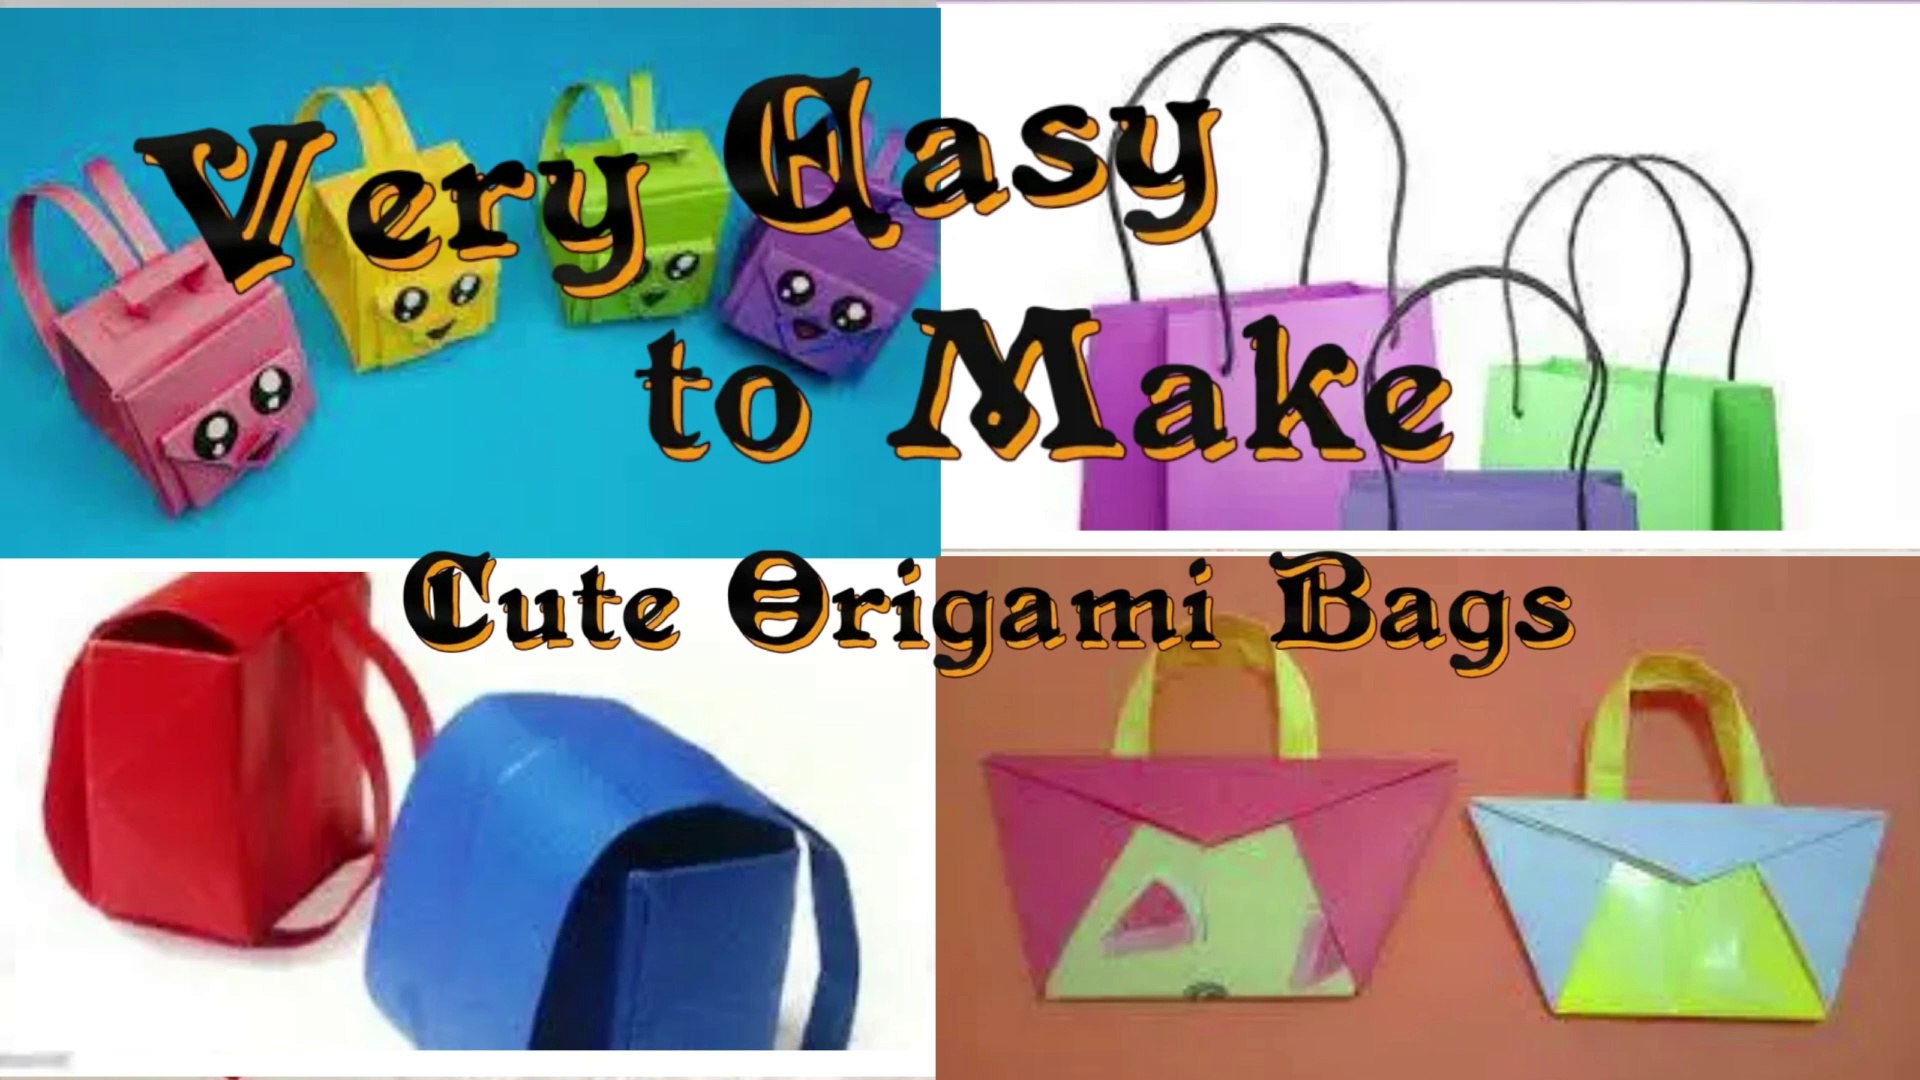 Very Easy to Make Cute Origami Bags - video Dailymotion